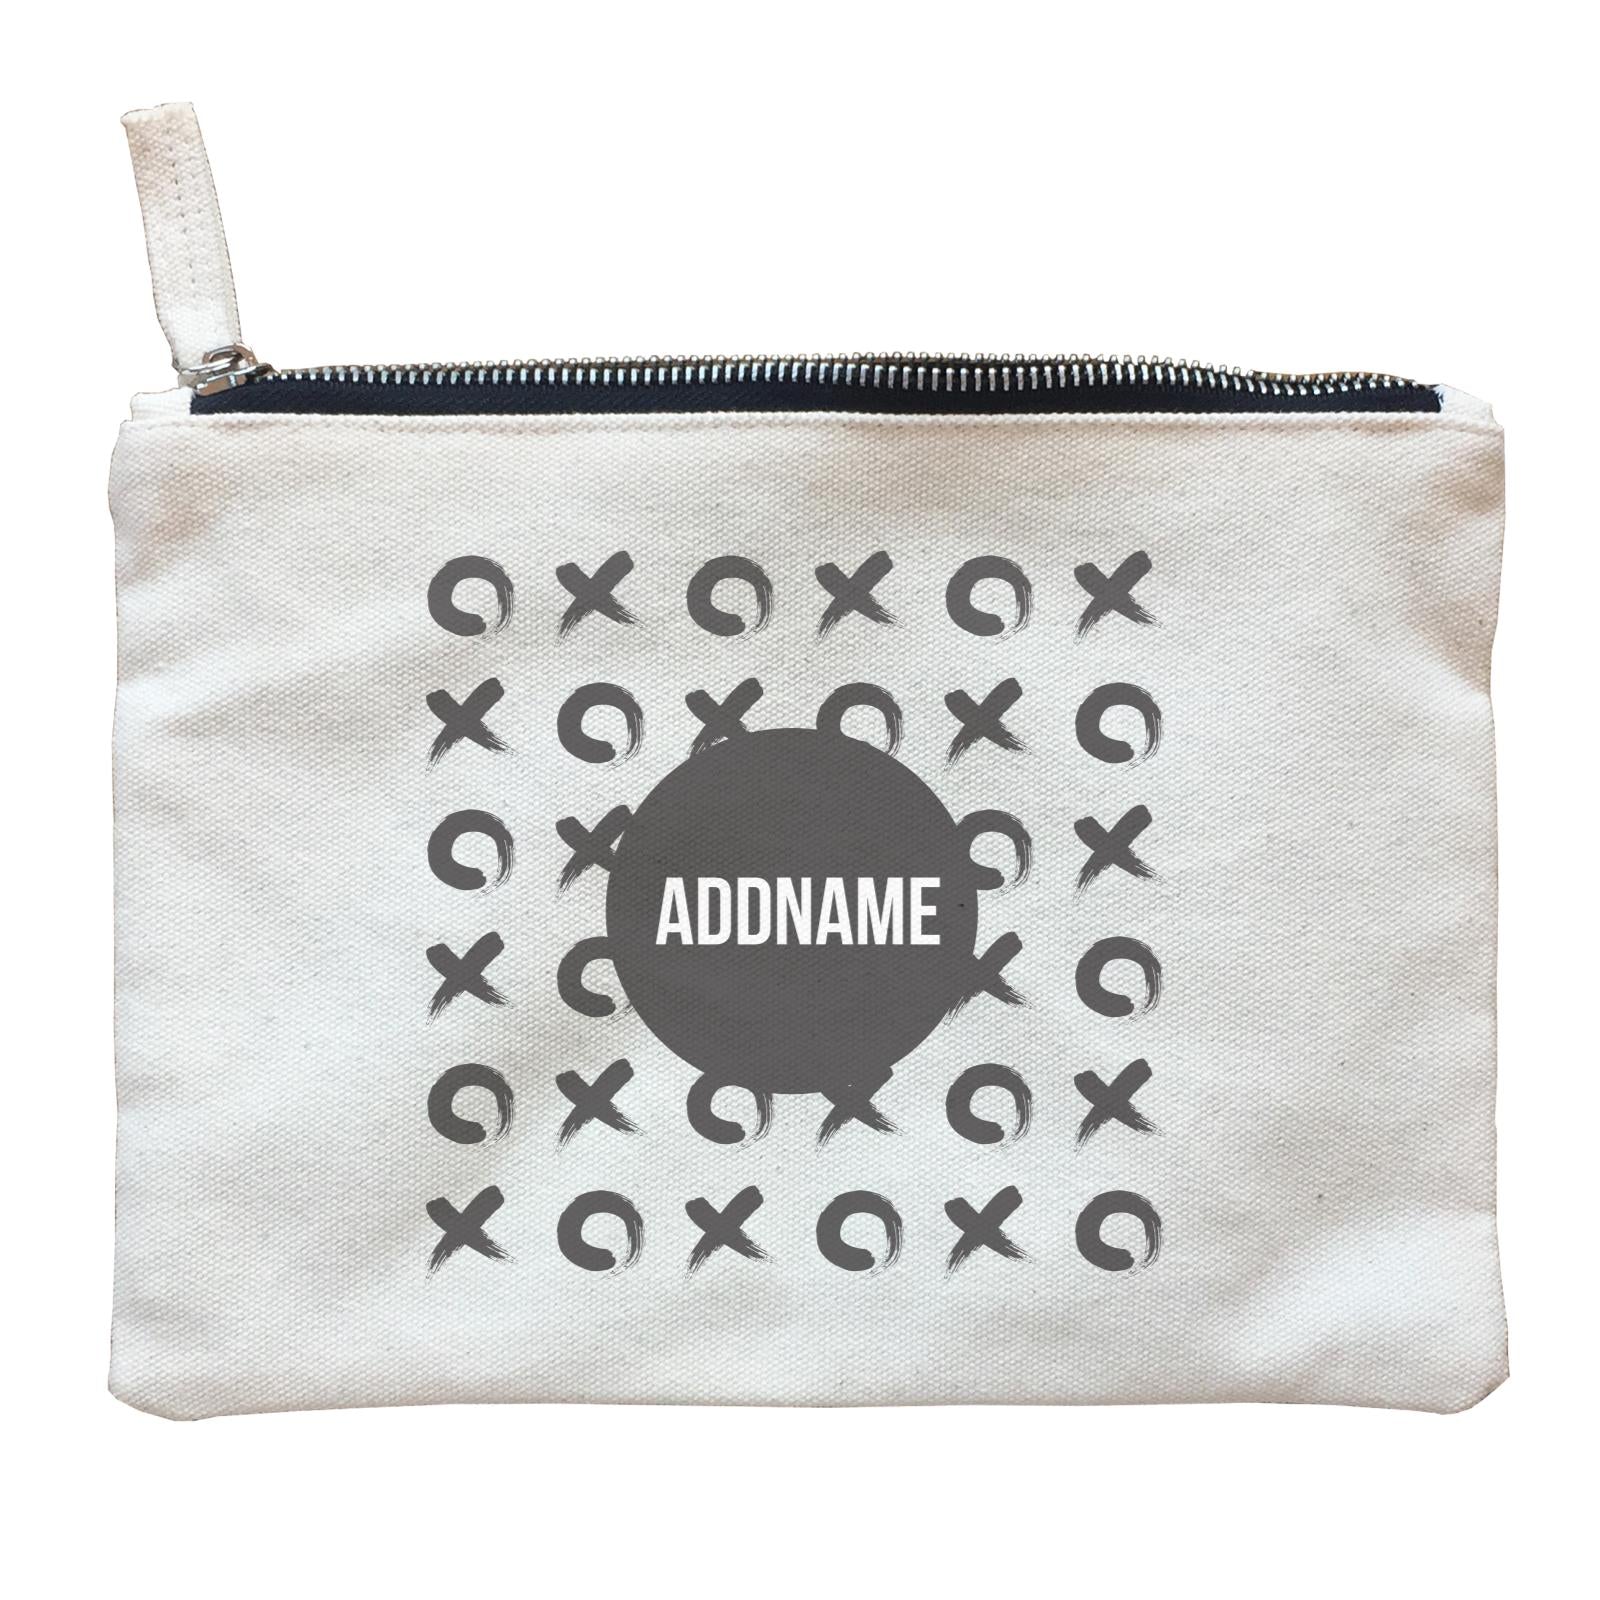 Monochrome Black Tic Tac Toe with Addname Zipper Pouch